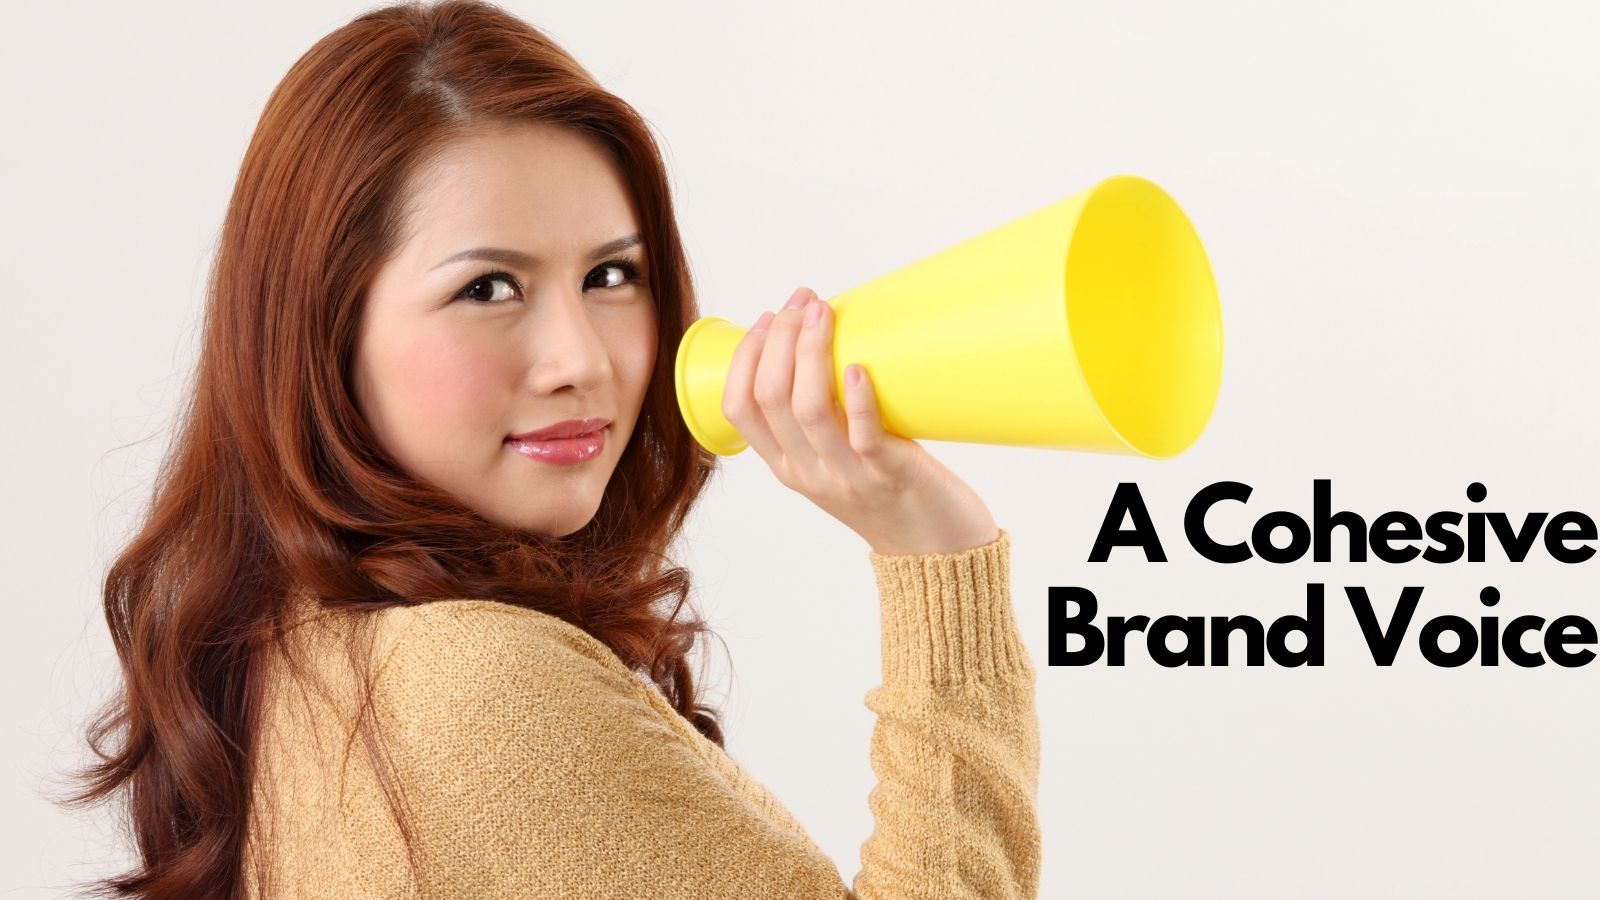 do you have a cohesive brand voice?